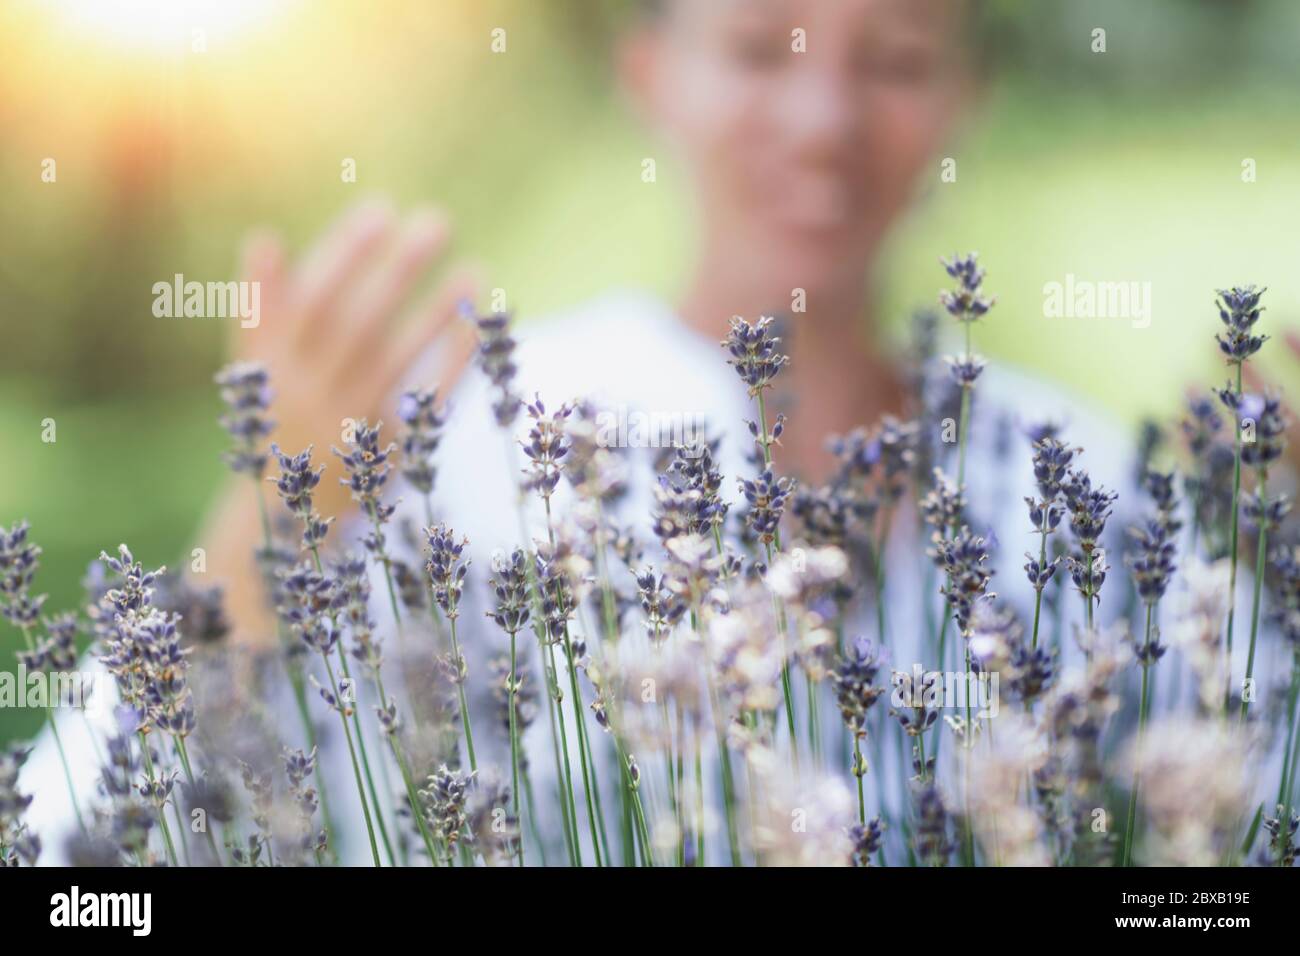 Breathing exercise in a lavender field Stock Photo